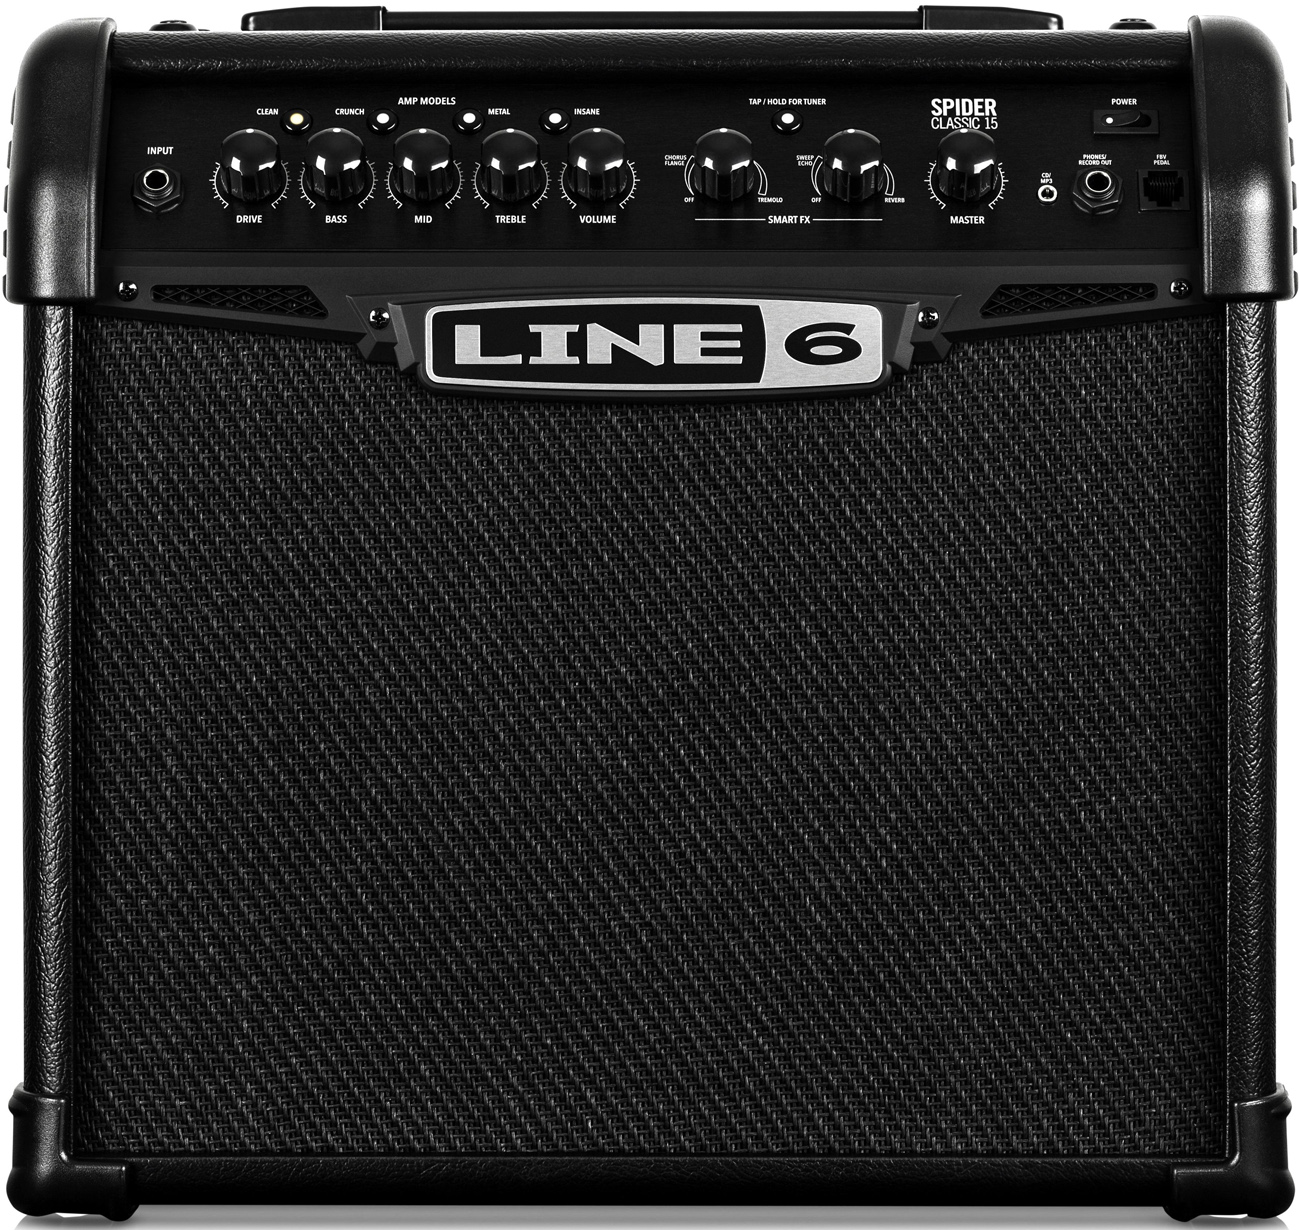 Line 6 Spider Classic 15 Guitar Modeling Amplifier